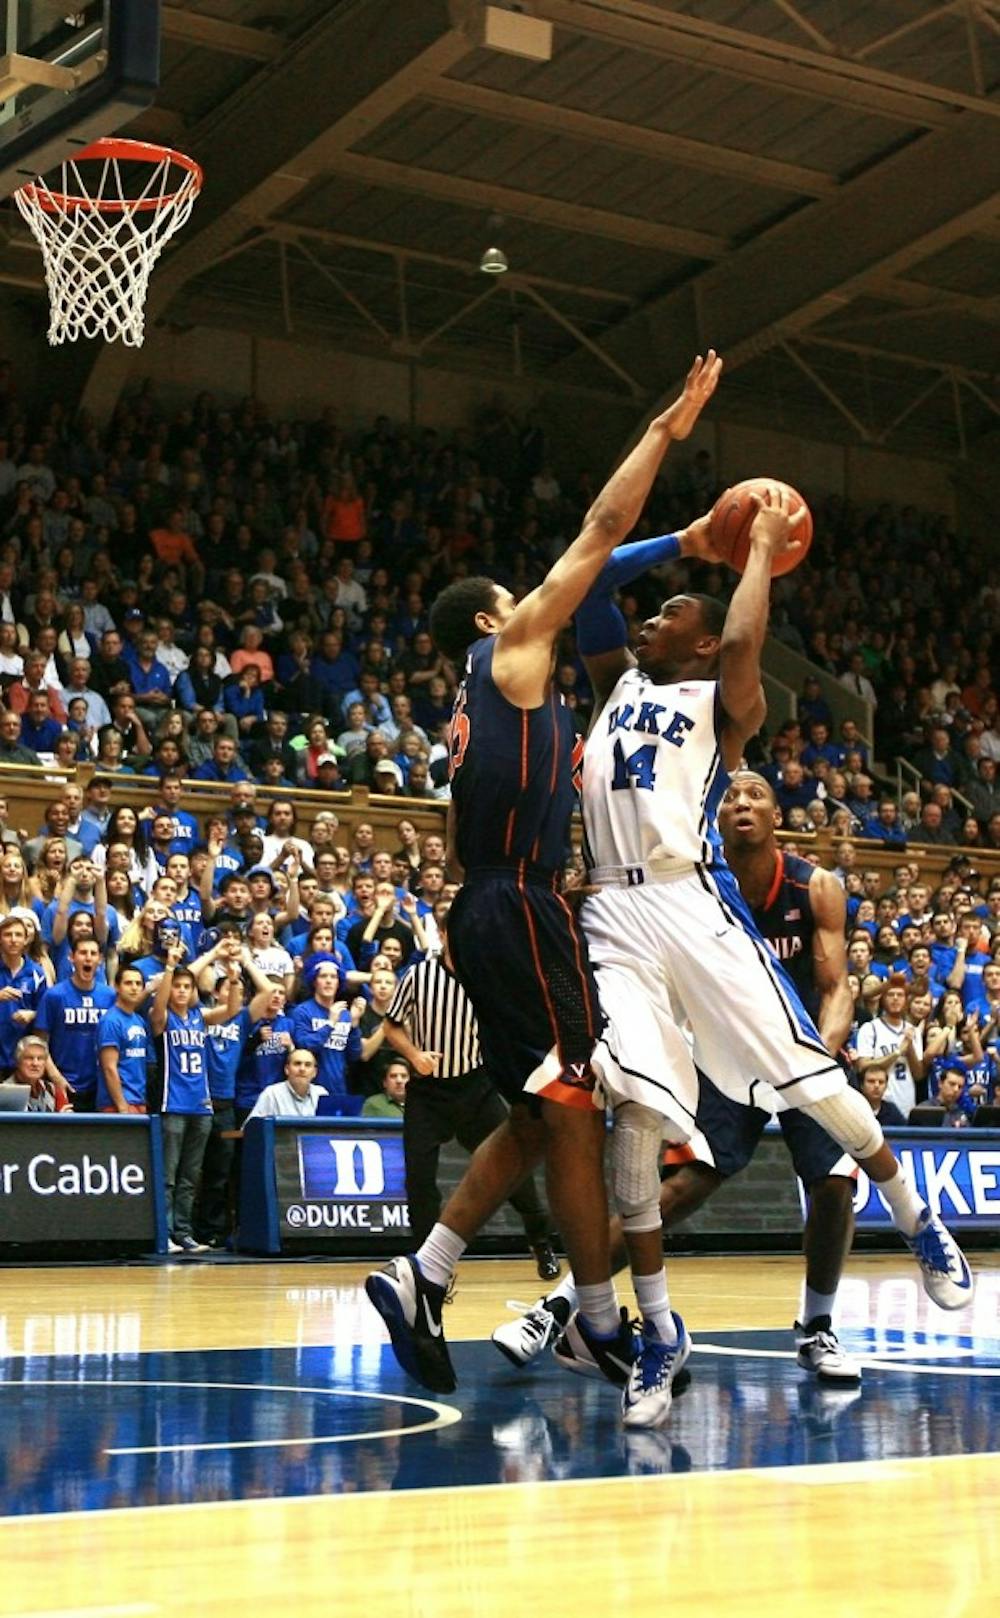 Duke upended Virginia 69-65 at Cameron indoor Stadium to hand the Cavaliers their first loss of conference play. Sulaimon's shot from the left corner with 13.5 seconds to play bounced off the iron and bounded high in the air before finding the bottom of the net to give the Blue Devils their go ahead score.